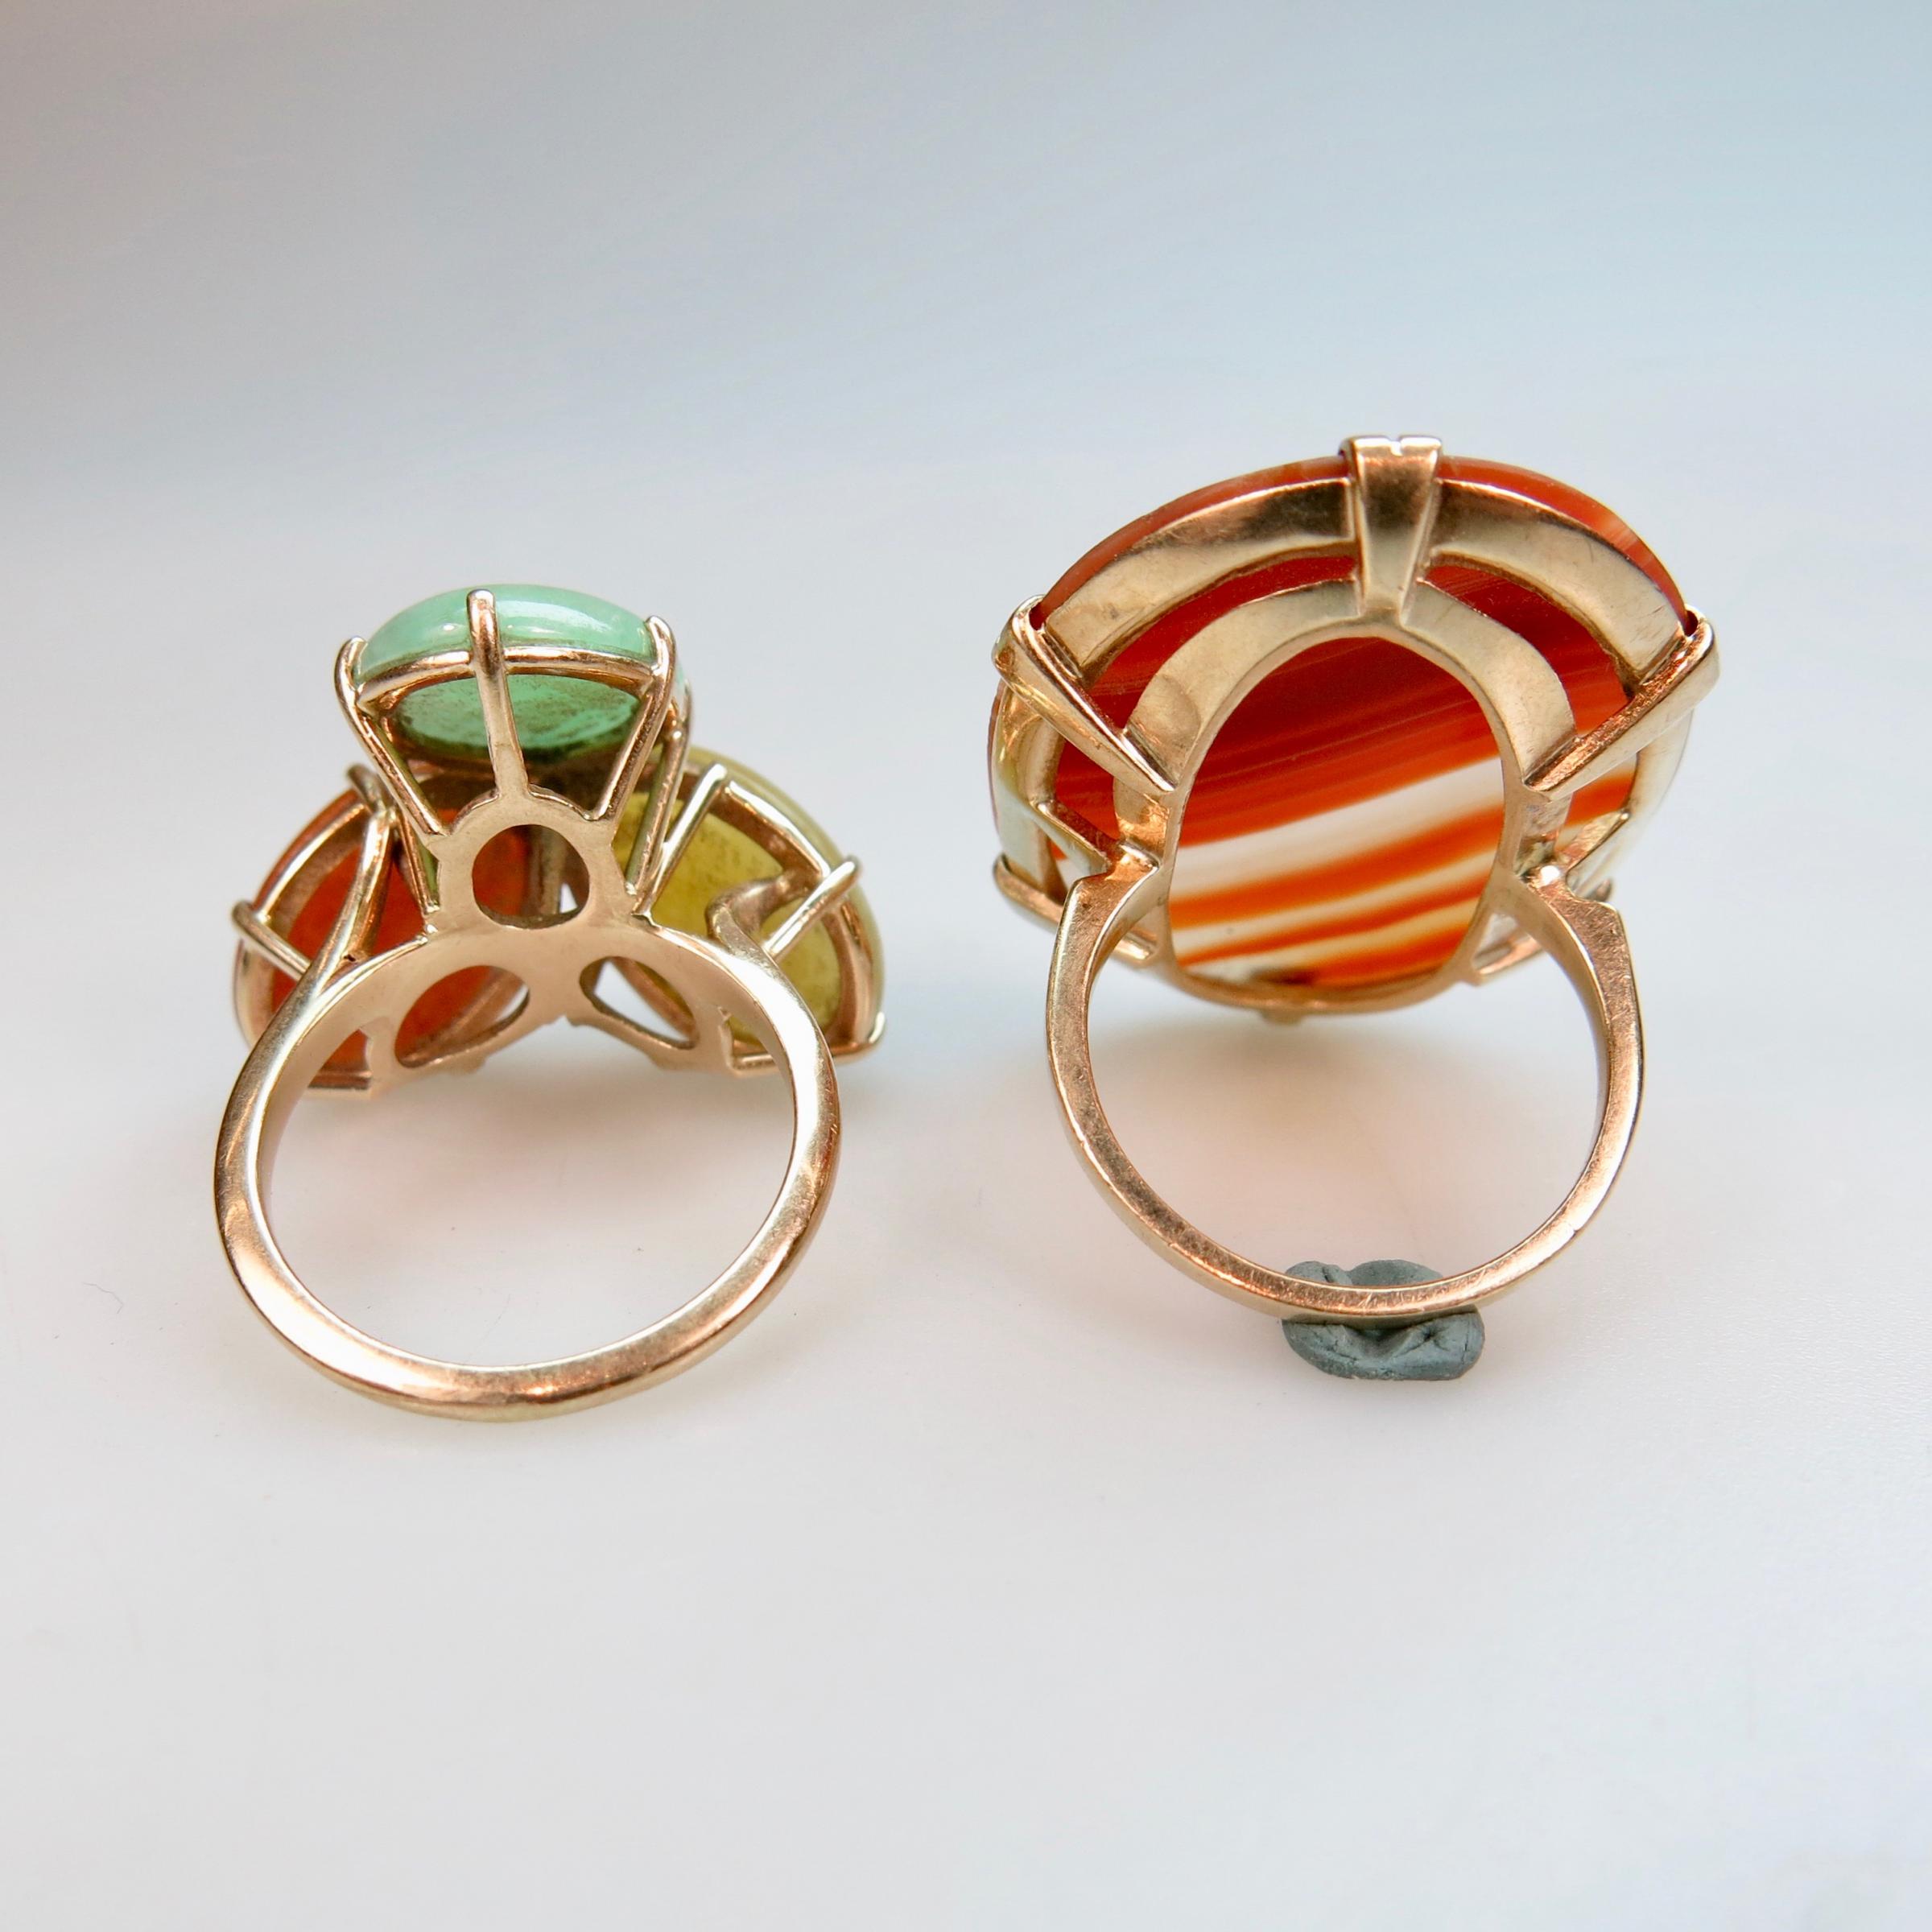 1 x 14k And 1 x 10k Yellow Gold Rings